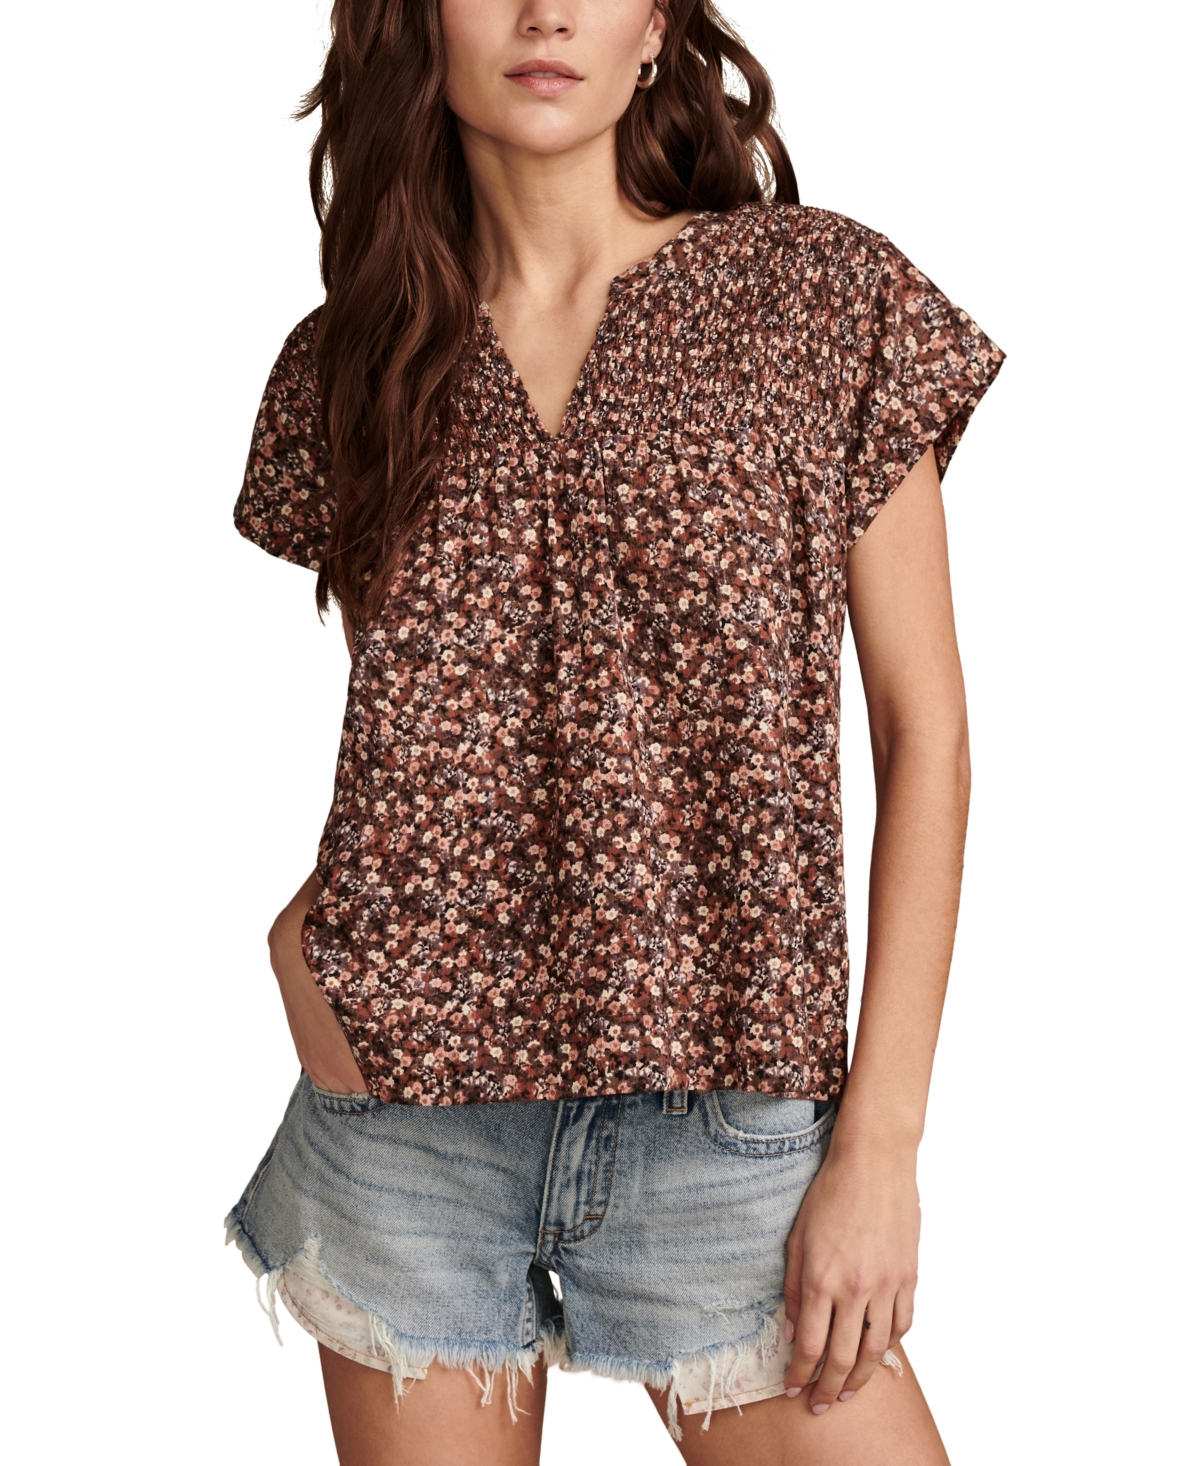 LUCKY BRAND WOMEN'S PRINTED SMOCKED SHORT-SLEEVE TOP